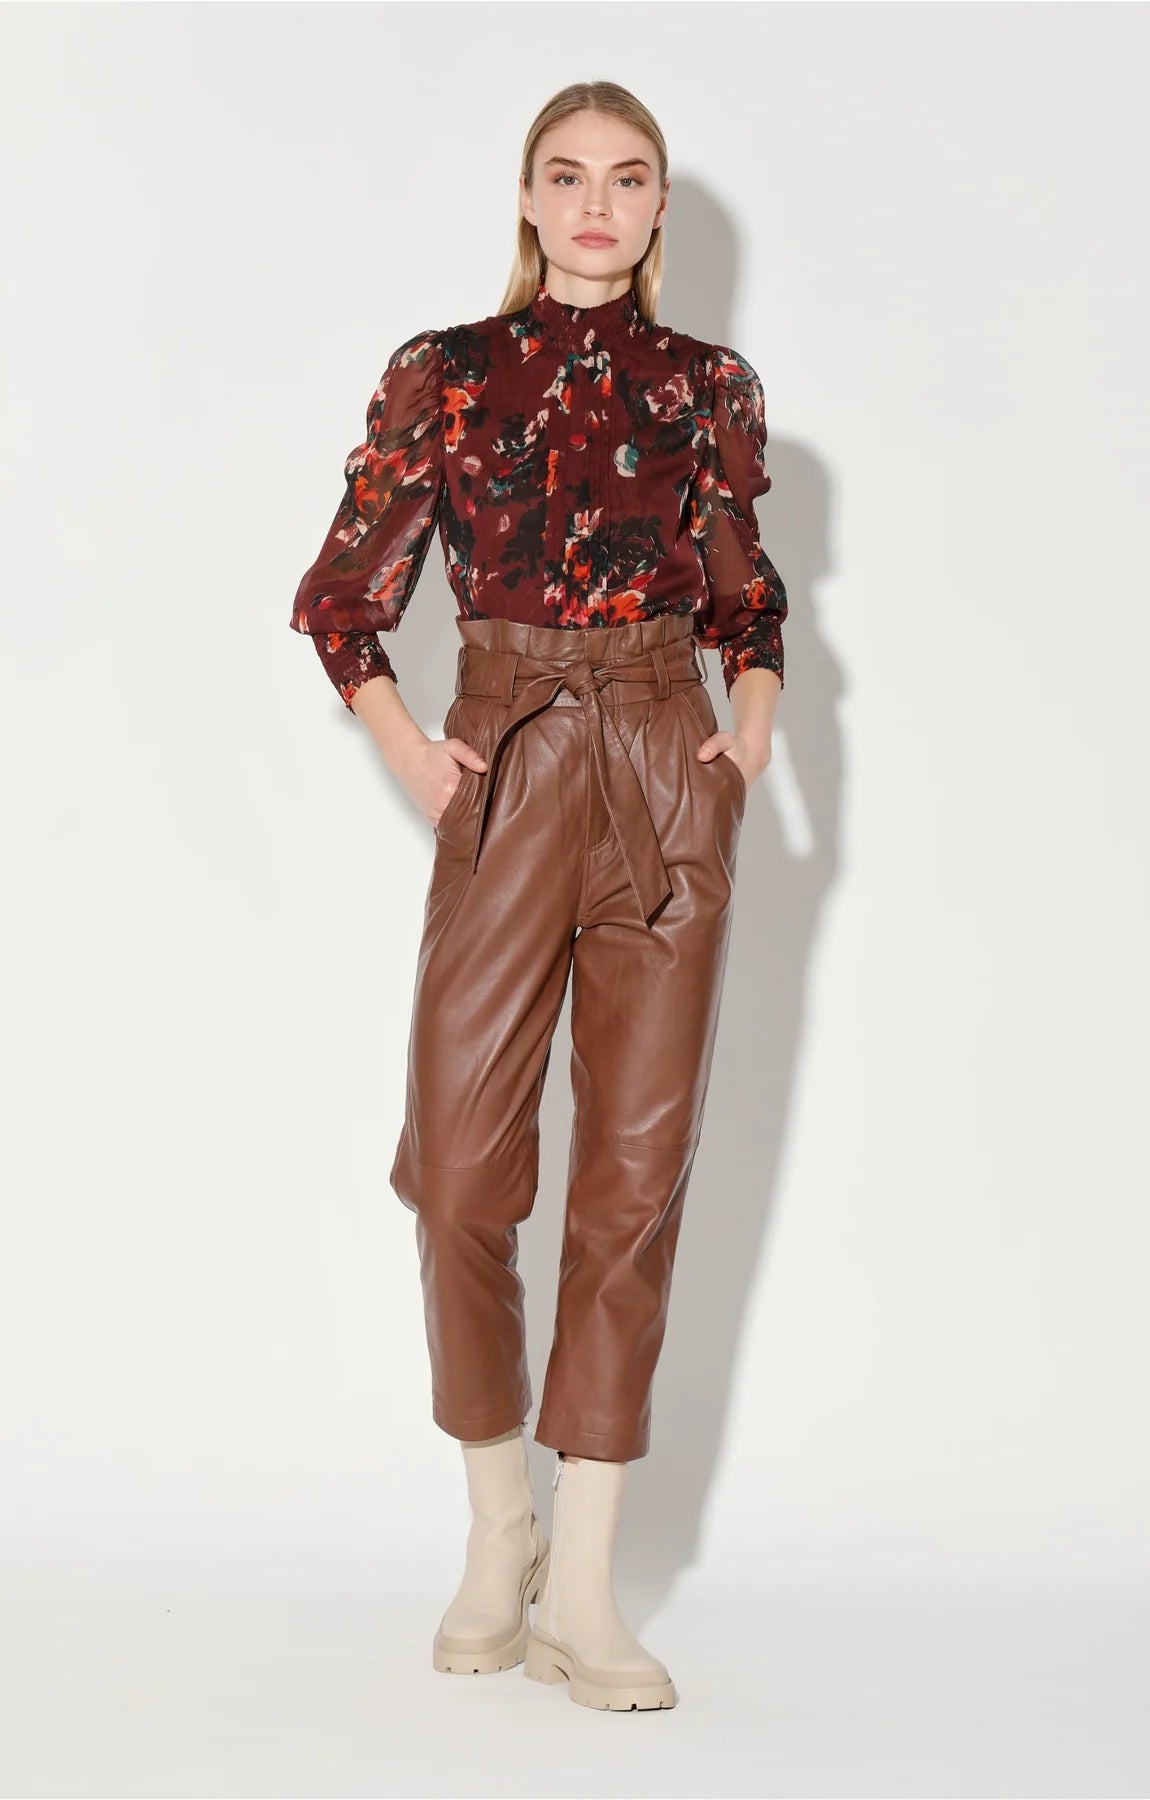 Walter Baker Maggie Leather Pant in Walnut